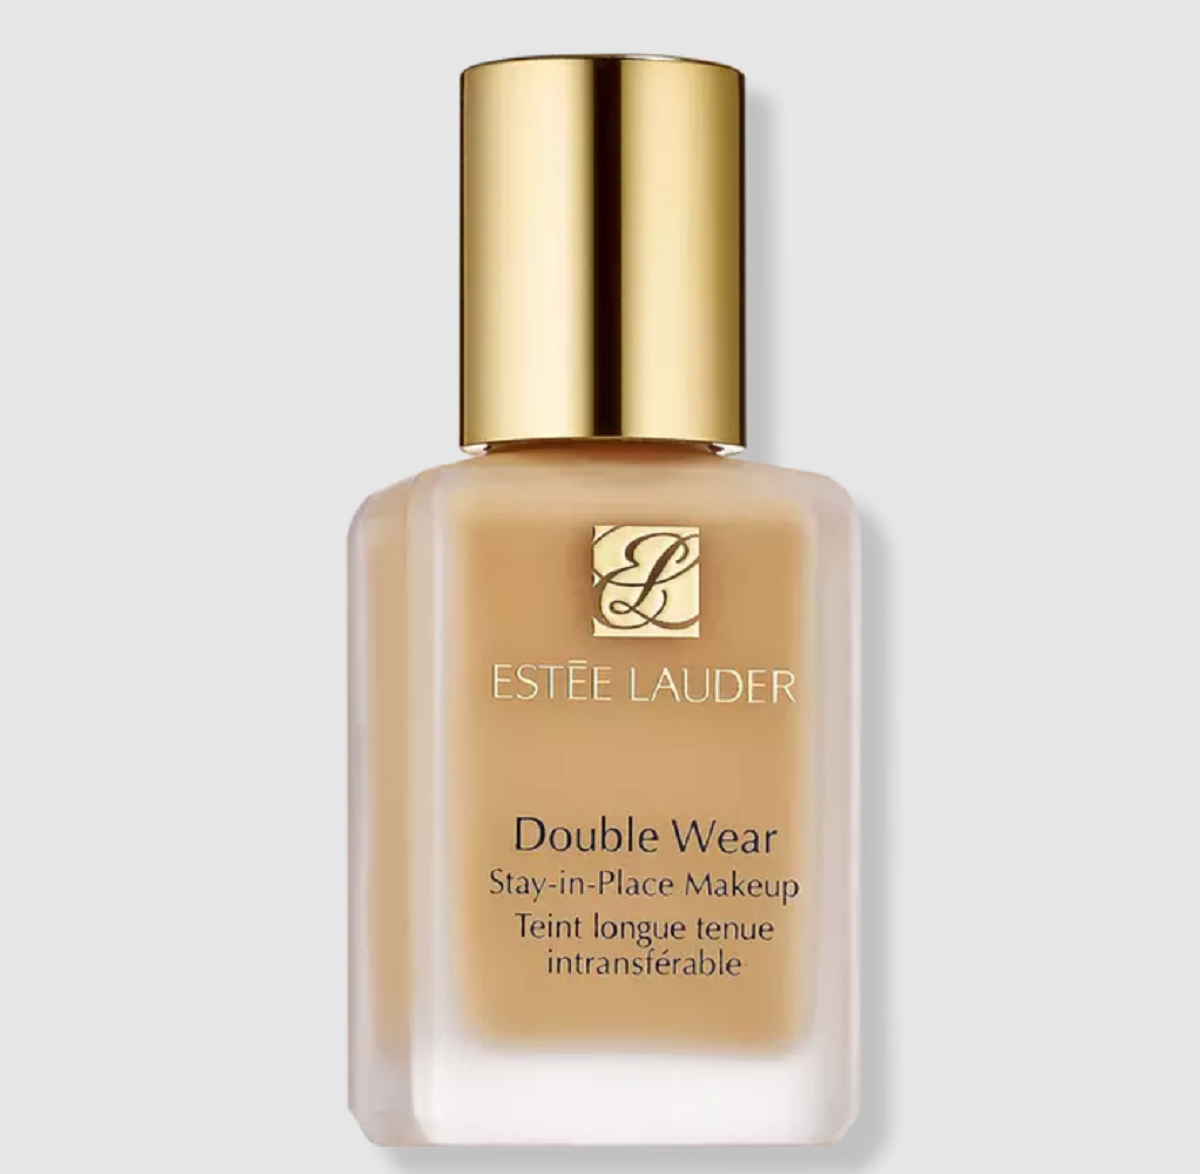 Complimentary Double Wear Primer Deluxe Sample at Ulta Beauty